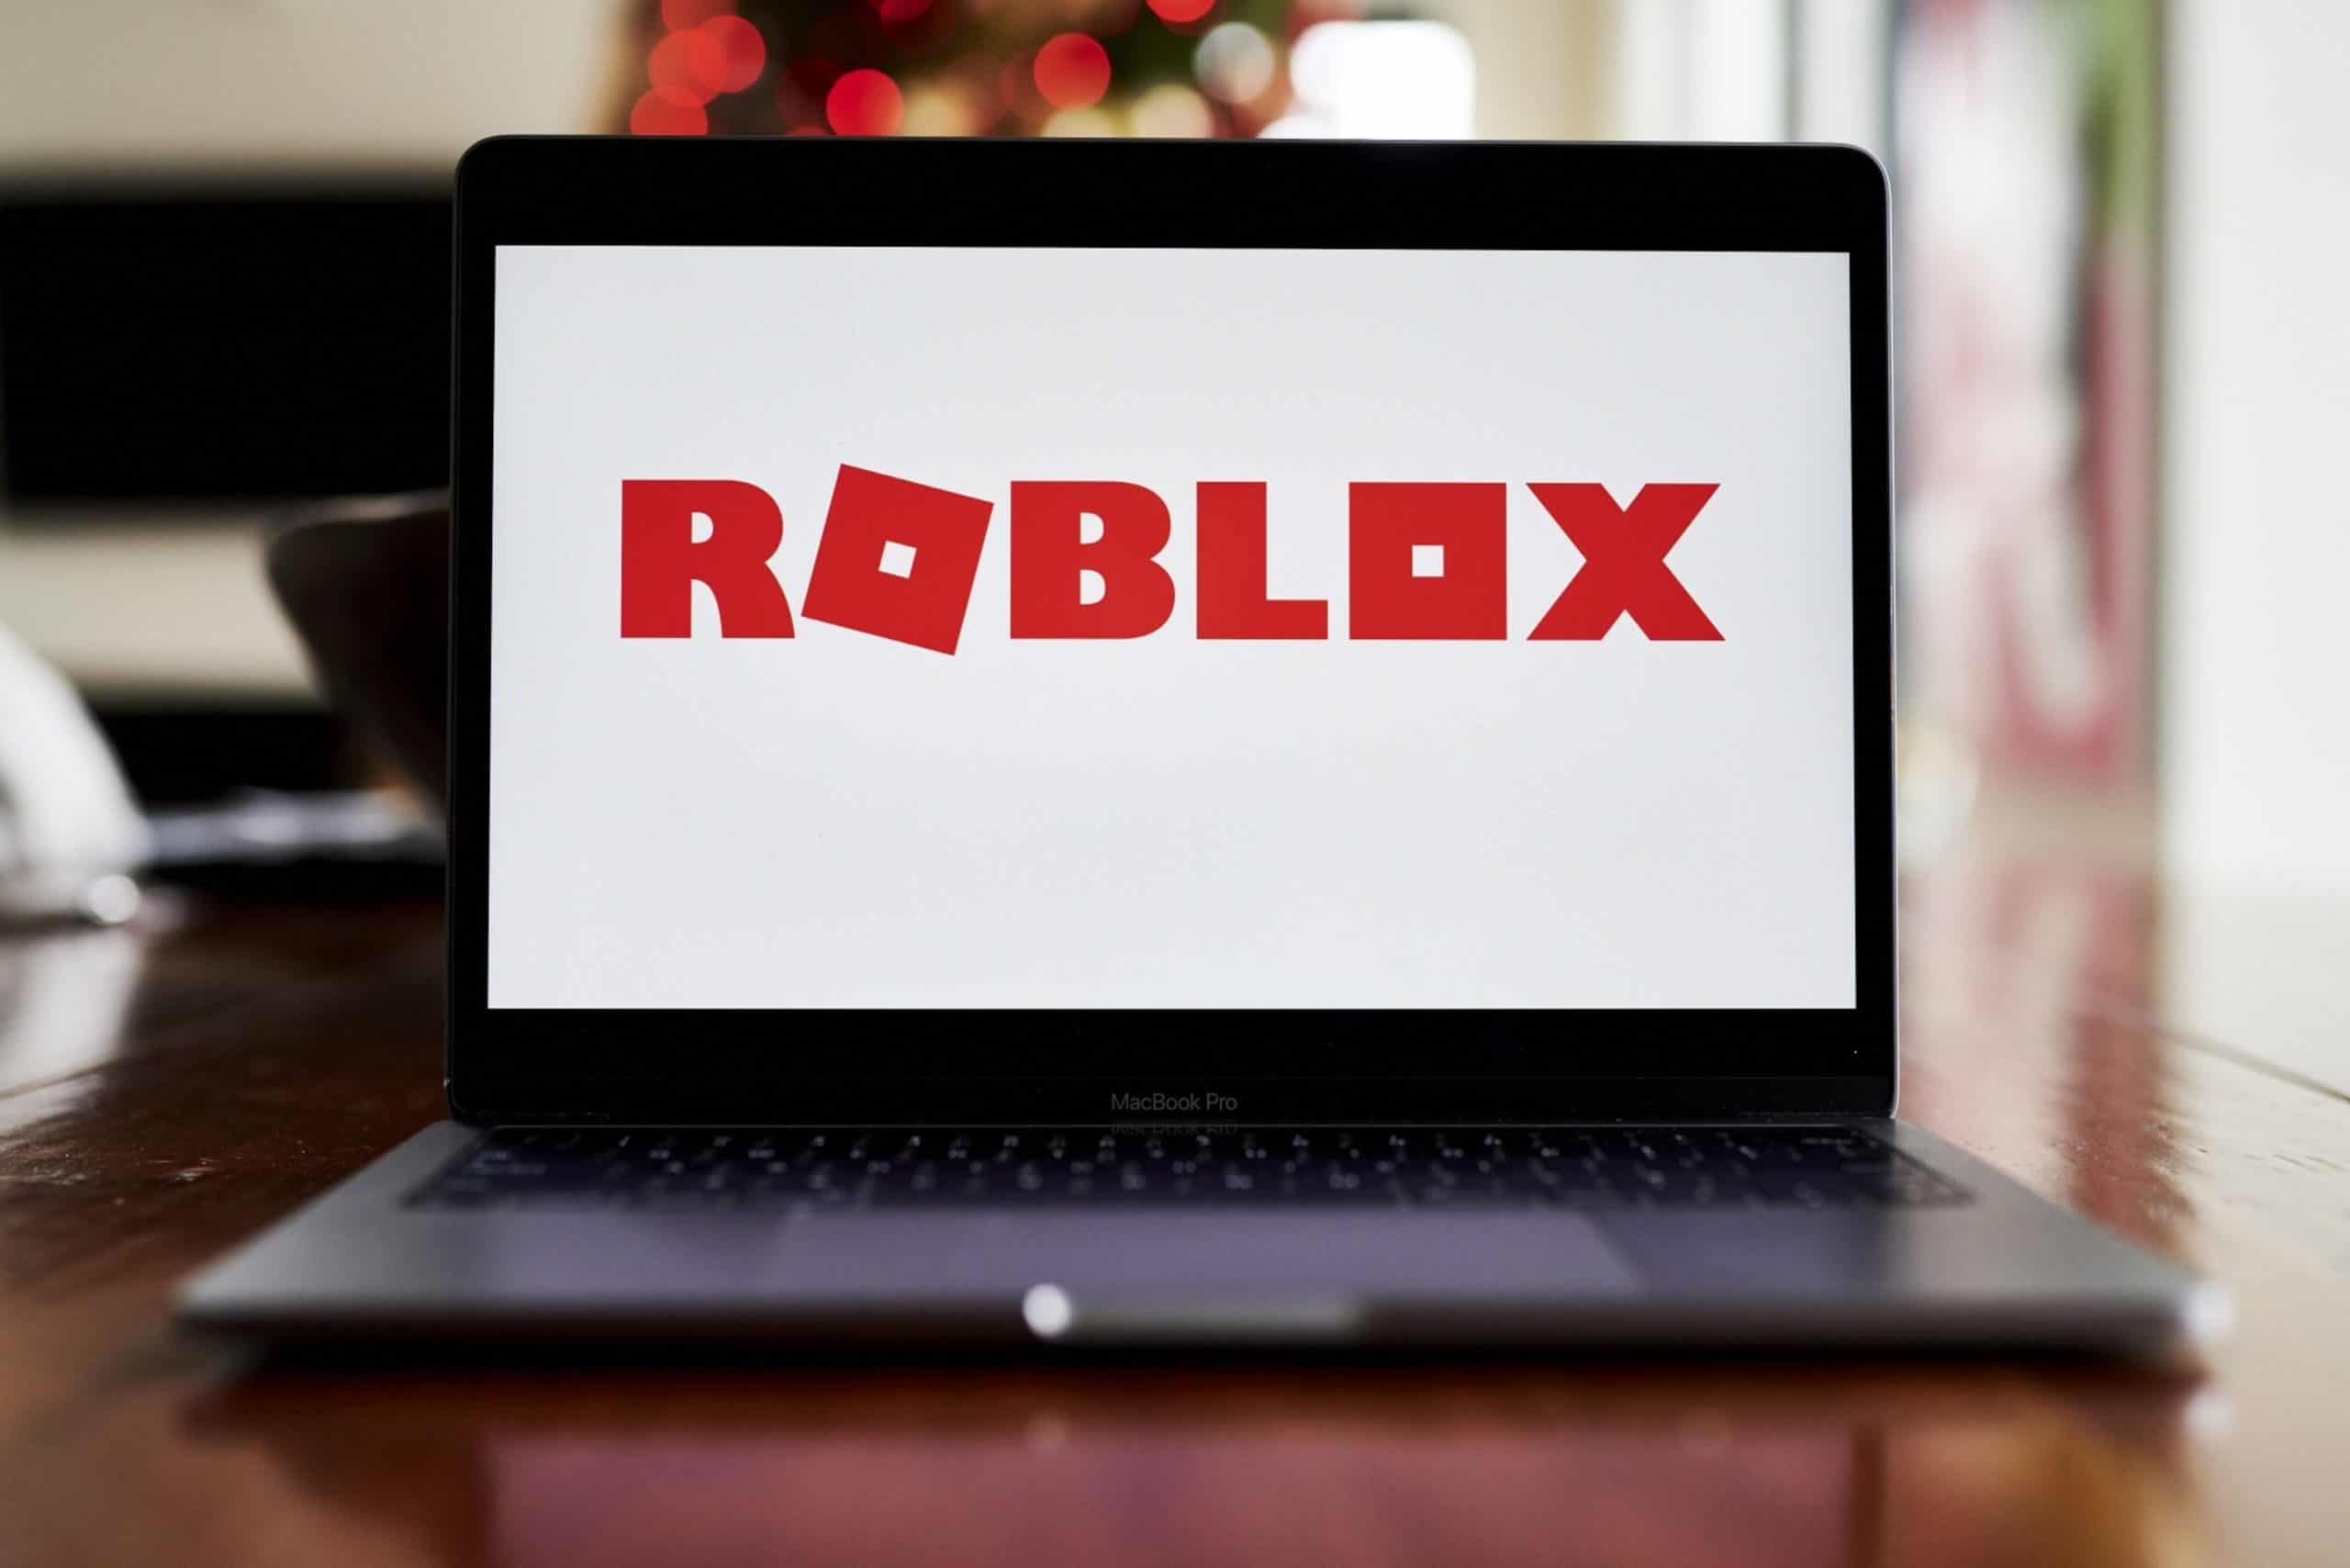 Popular Online Game Developer Roblox Goes Public In Rare Direct Listing - last seen roblox website